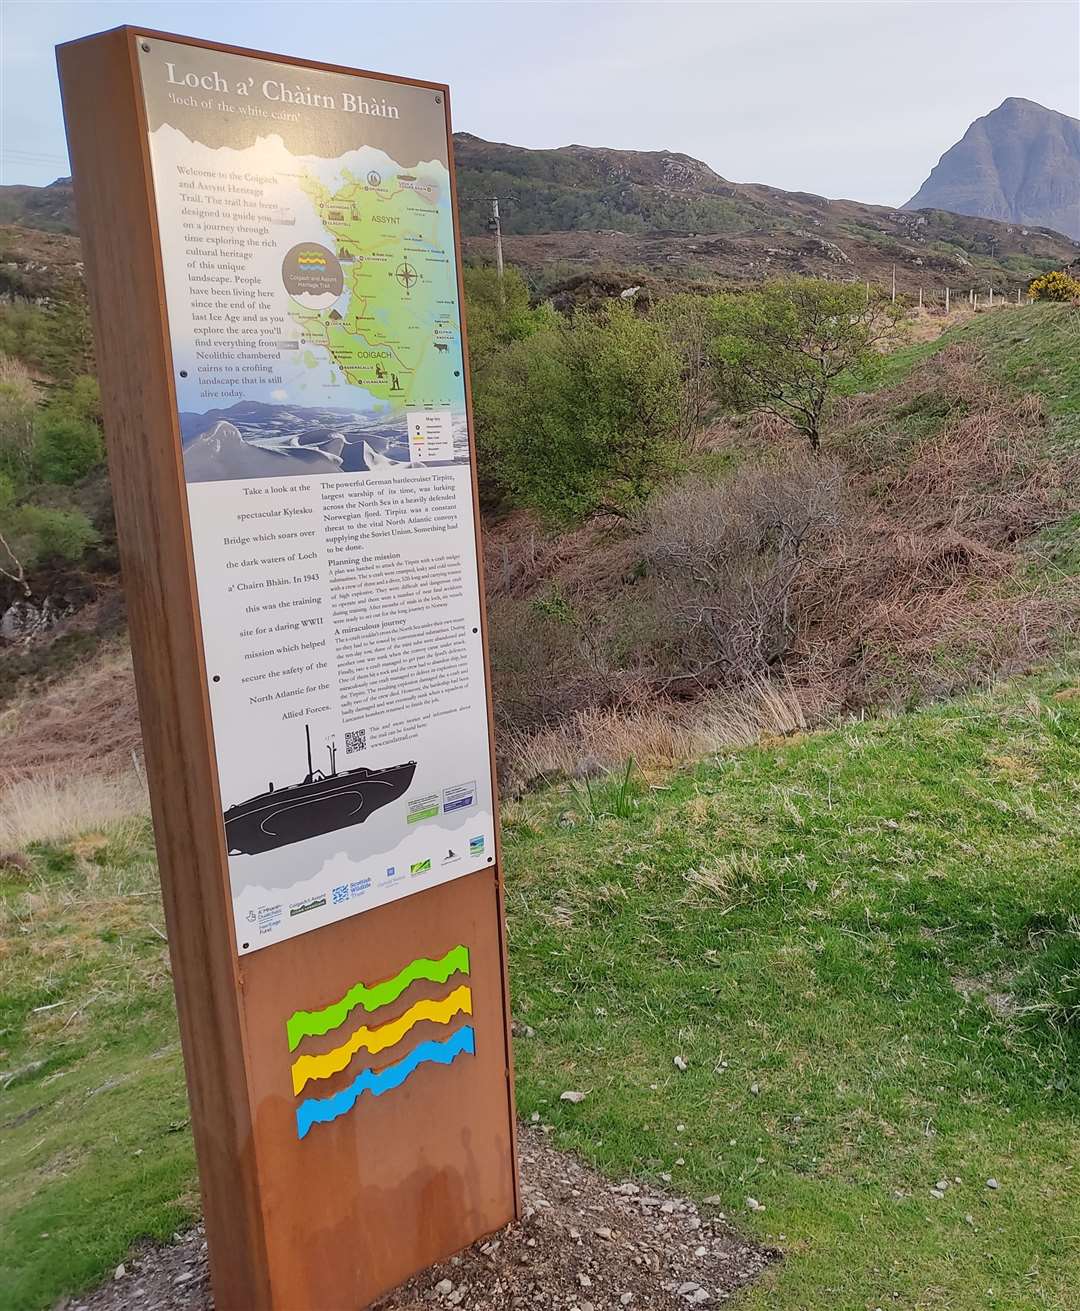 One of the monoliths is placed at Kylesku.